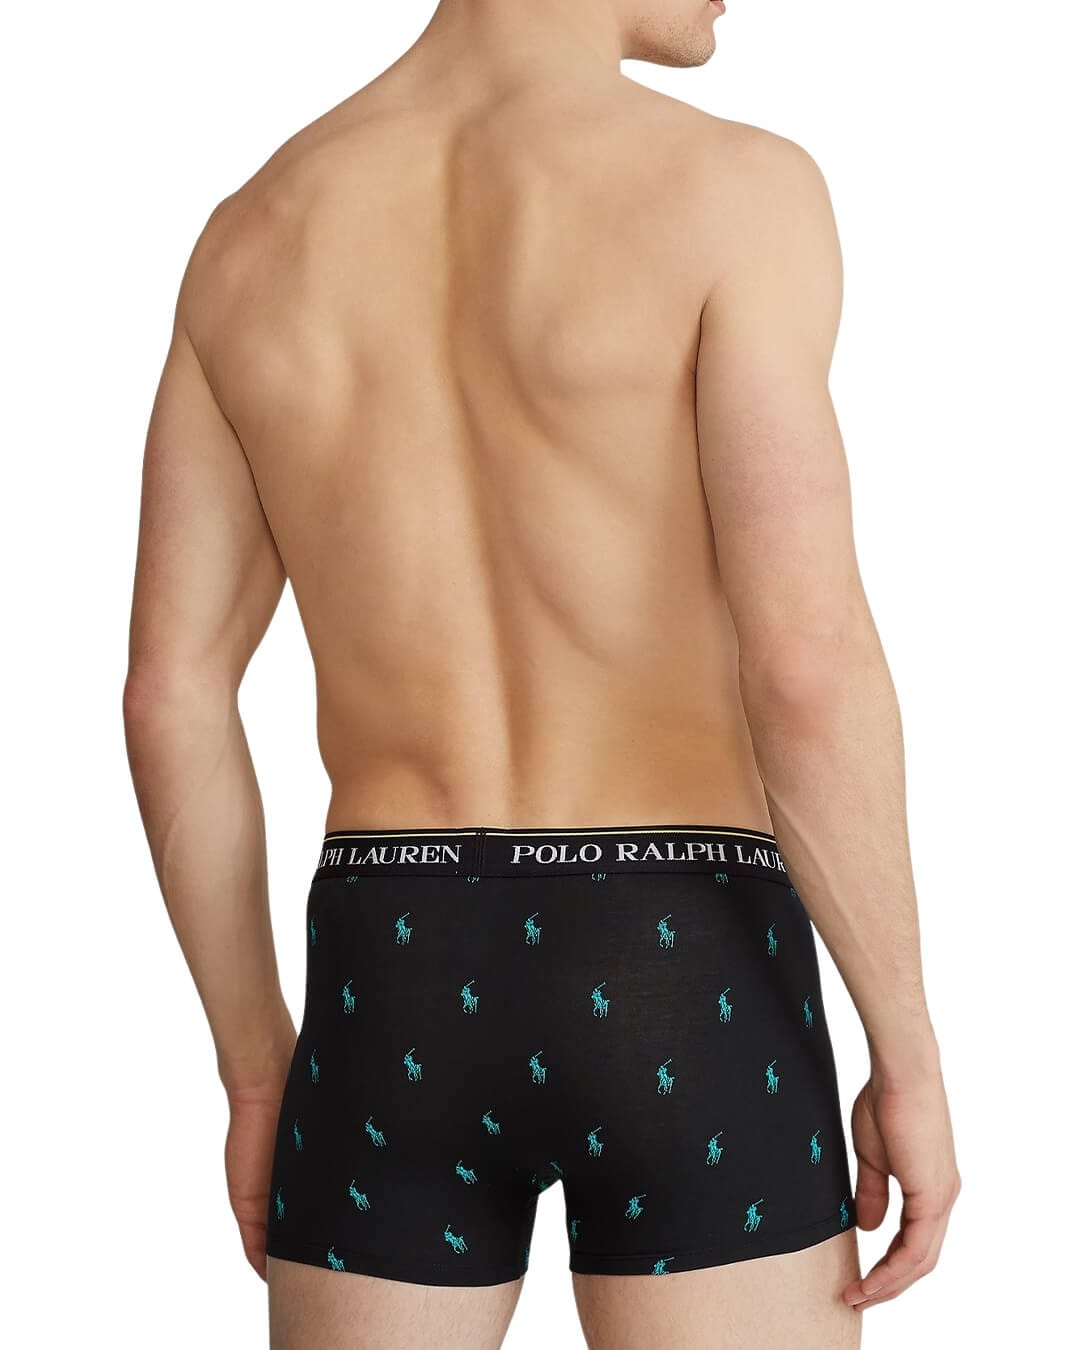 Polo Ralph Lauren Underwear Polo Ralph Lauren Black, Red And Turquoise Three-Pack Trunks